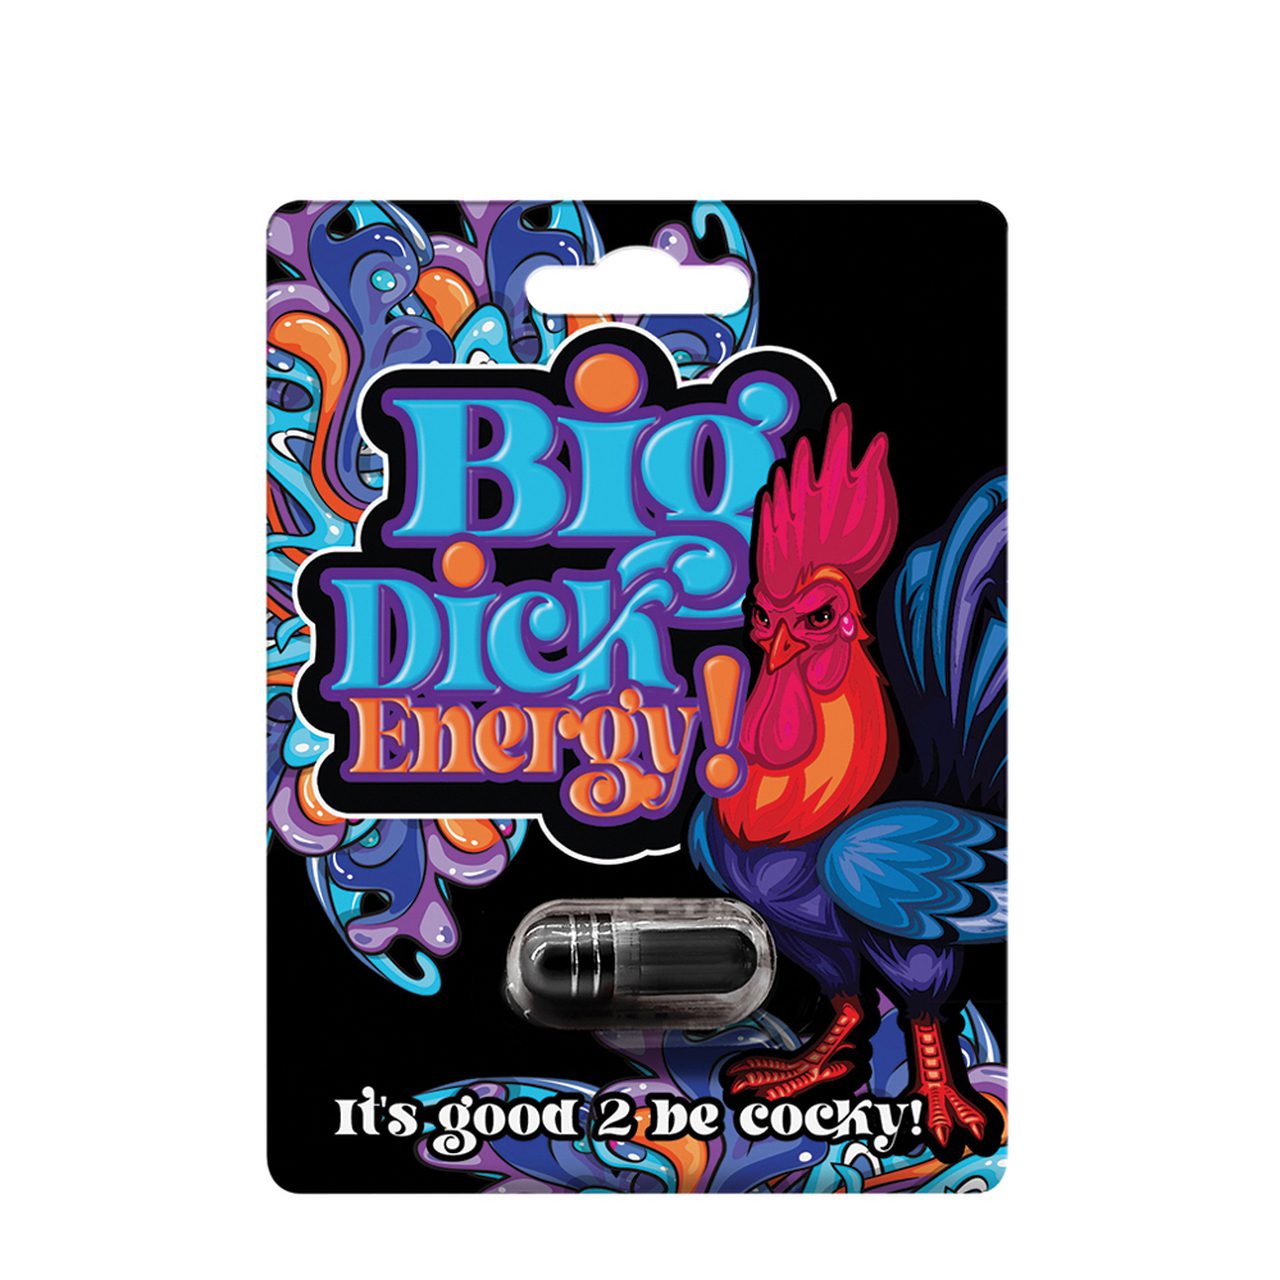 Big Dick Energy Pill The Ppg Store